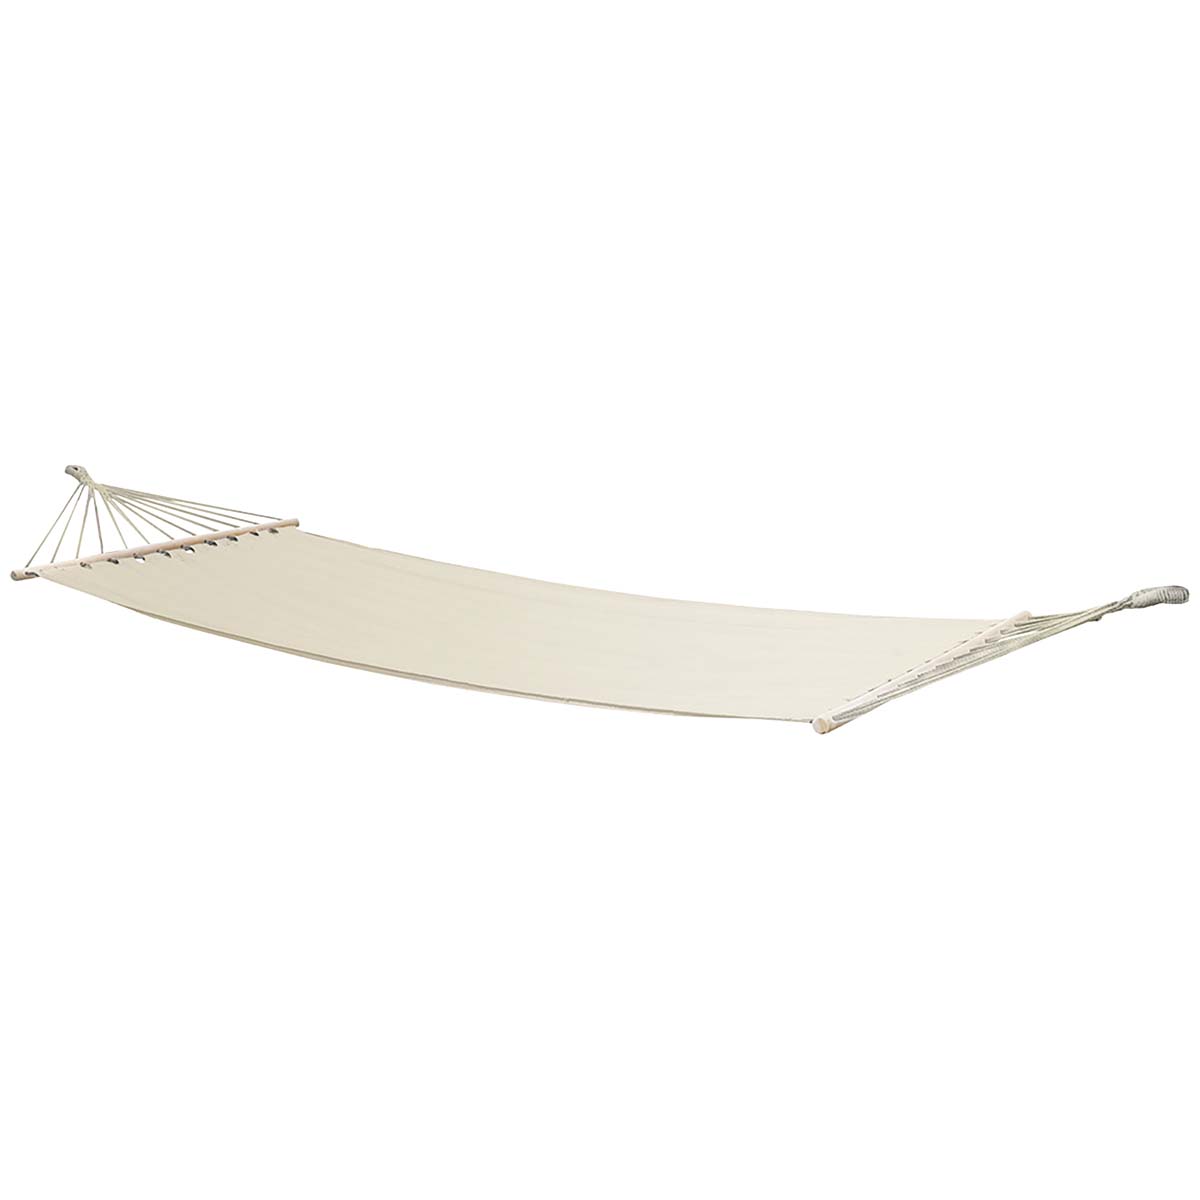 7100214 A cheerful and sturdy hammock To relax on holiday, in the garden or on the balcony. Made of sturdy 320gr/m² cotton/polyester. The hammock has a spreading stick of 100 cm on the ends so that the fabric is always fully open. Maximum load-bearing capacity: 150 kilograms.